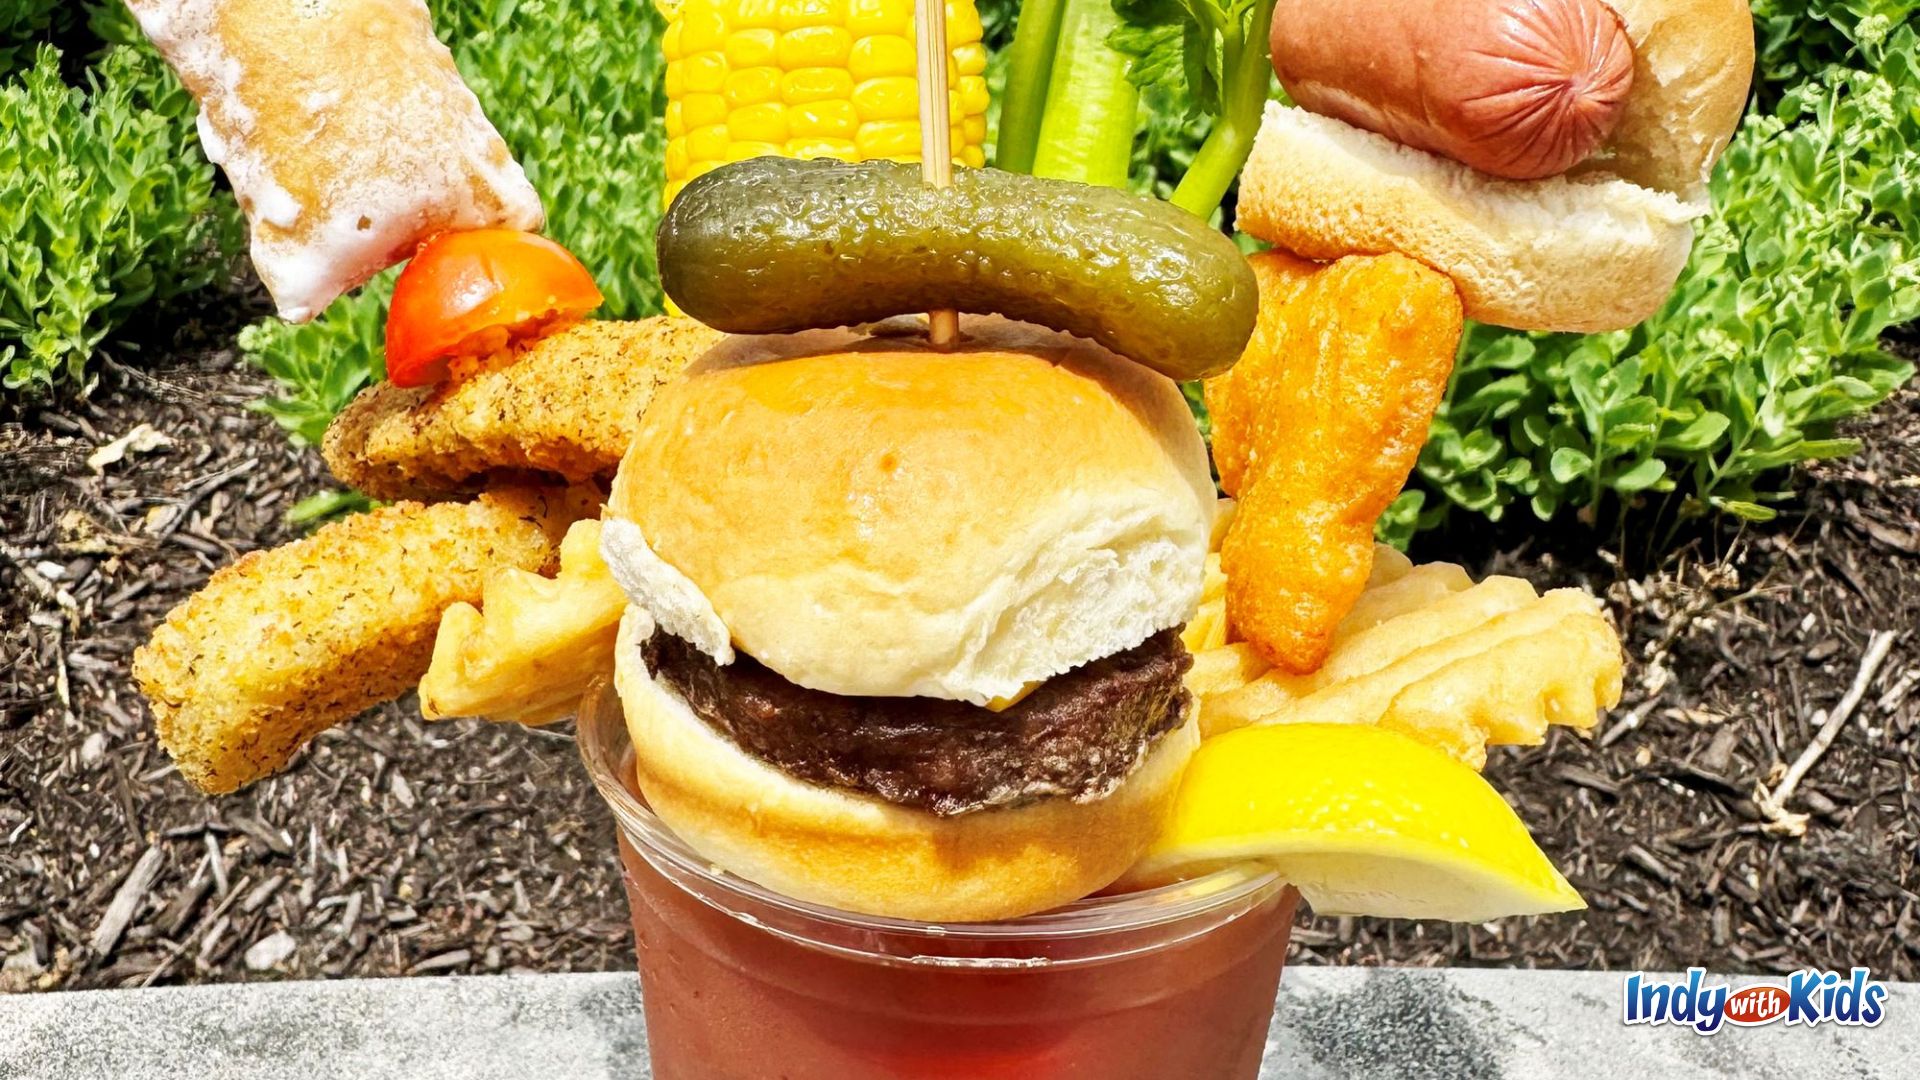 Indiana State Fair Food: A Bloody Mary loaded with miniature cookout foods, including a cheeseburger slider, dill pickle, waffle fry, mini hot dog, and more.